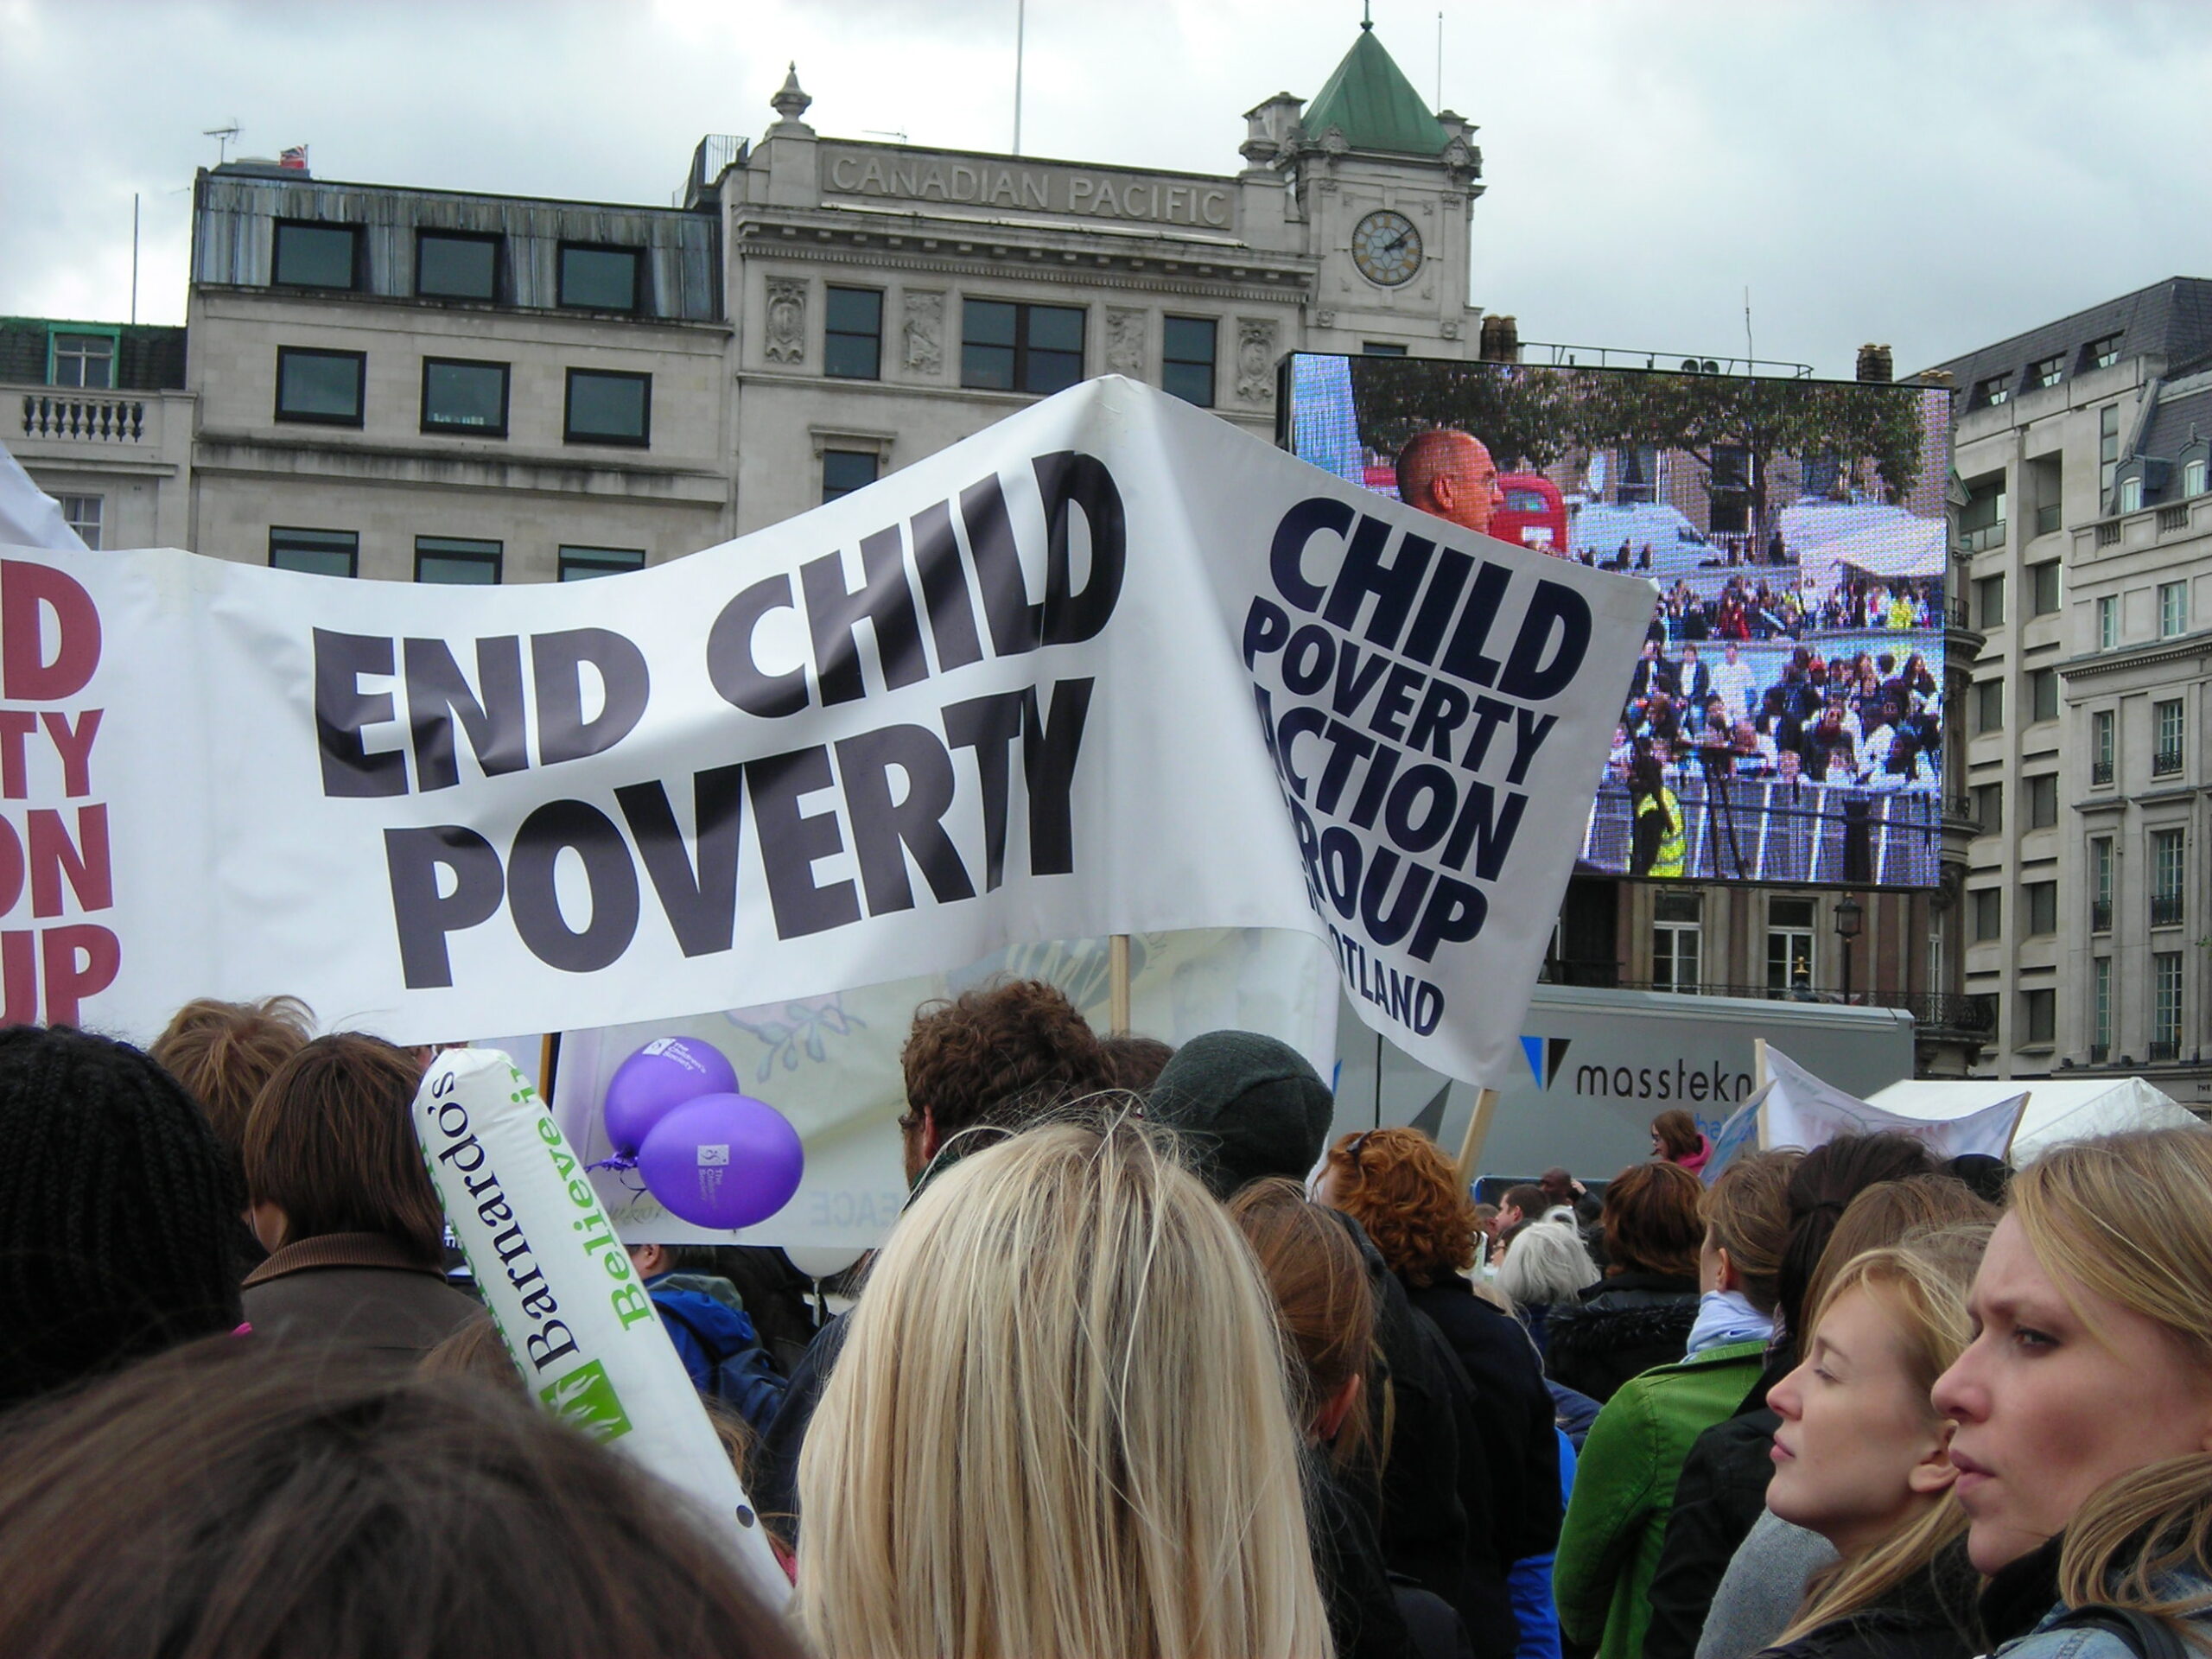 Signs at a rally say end child poverty.